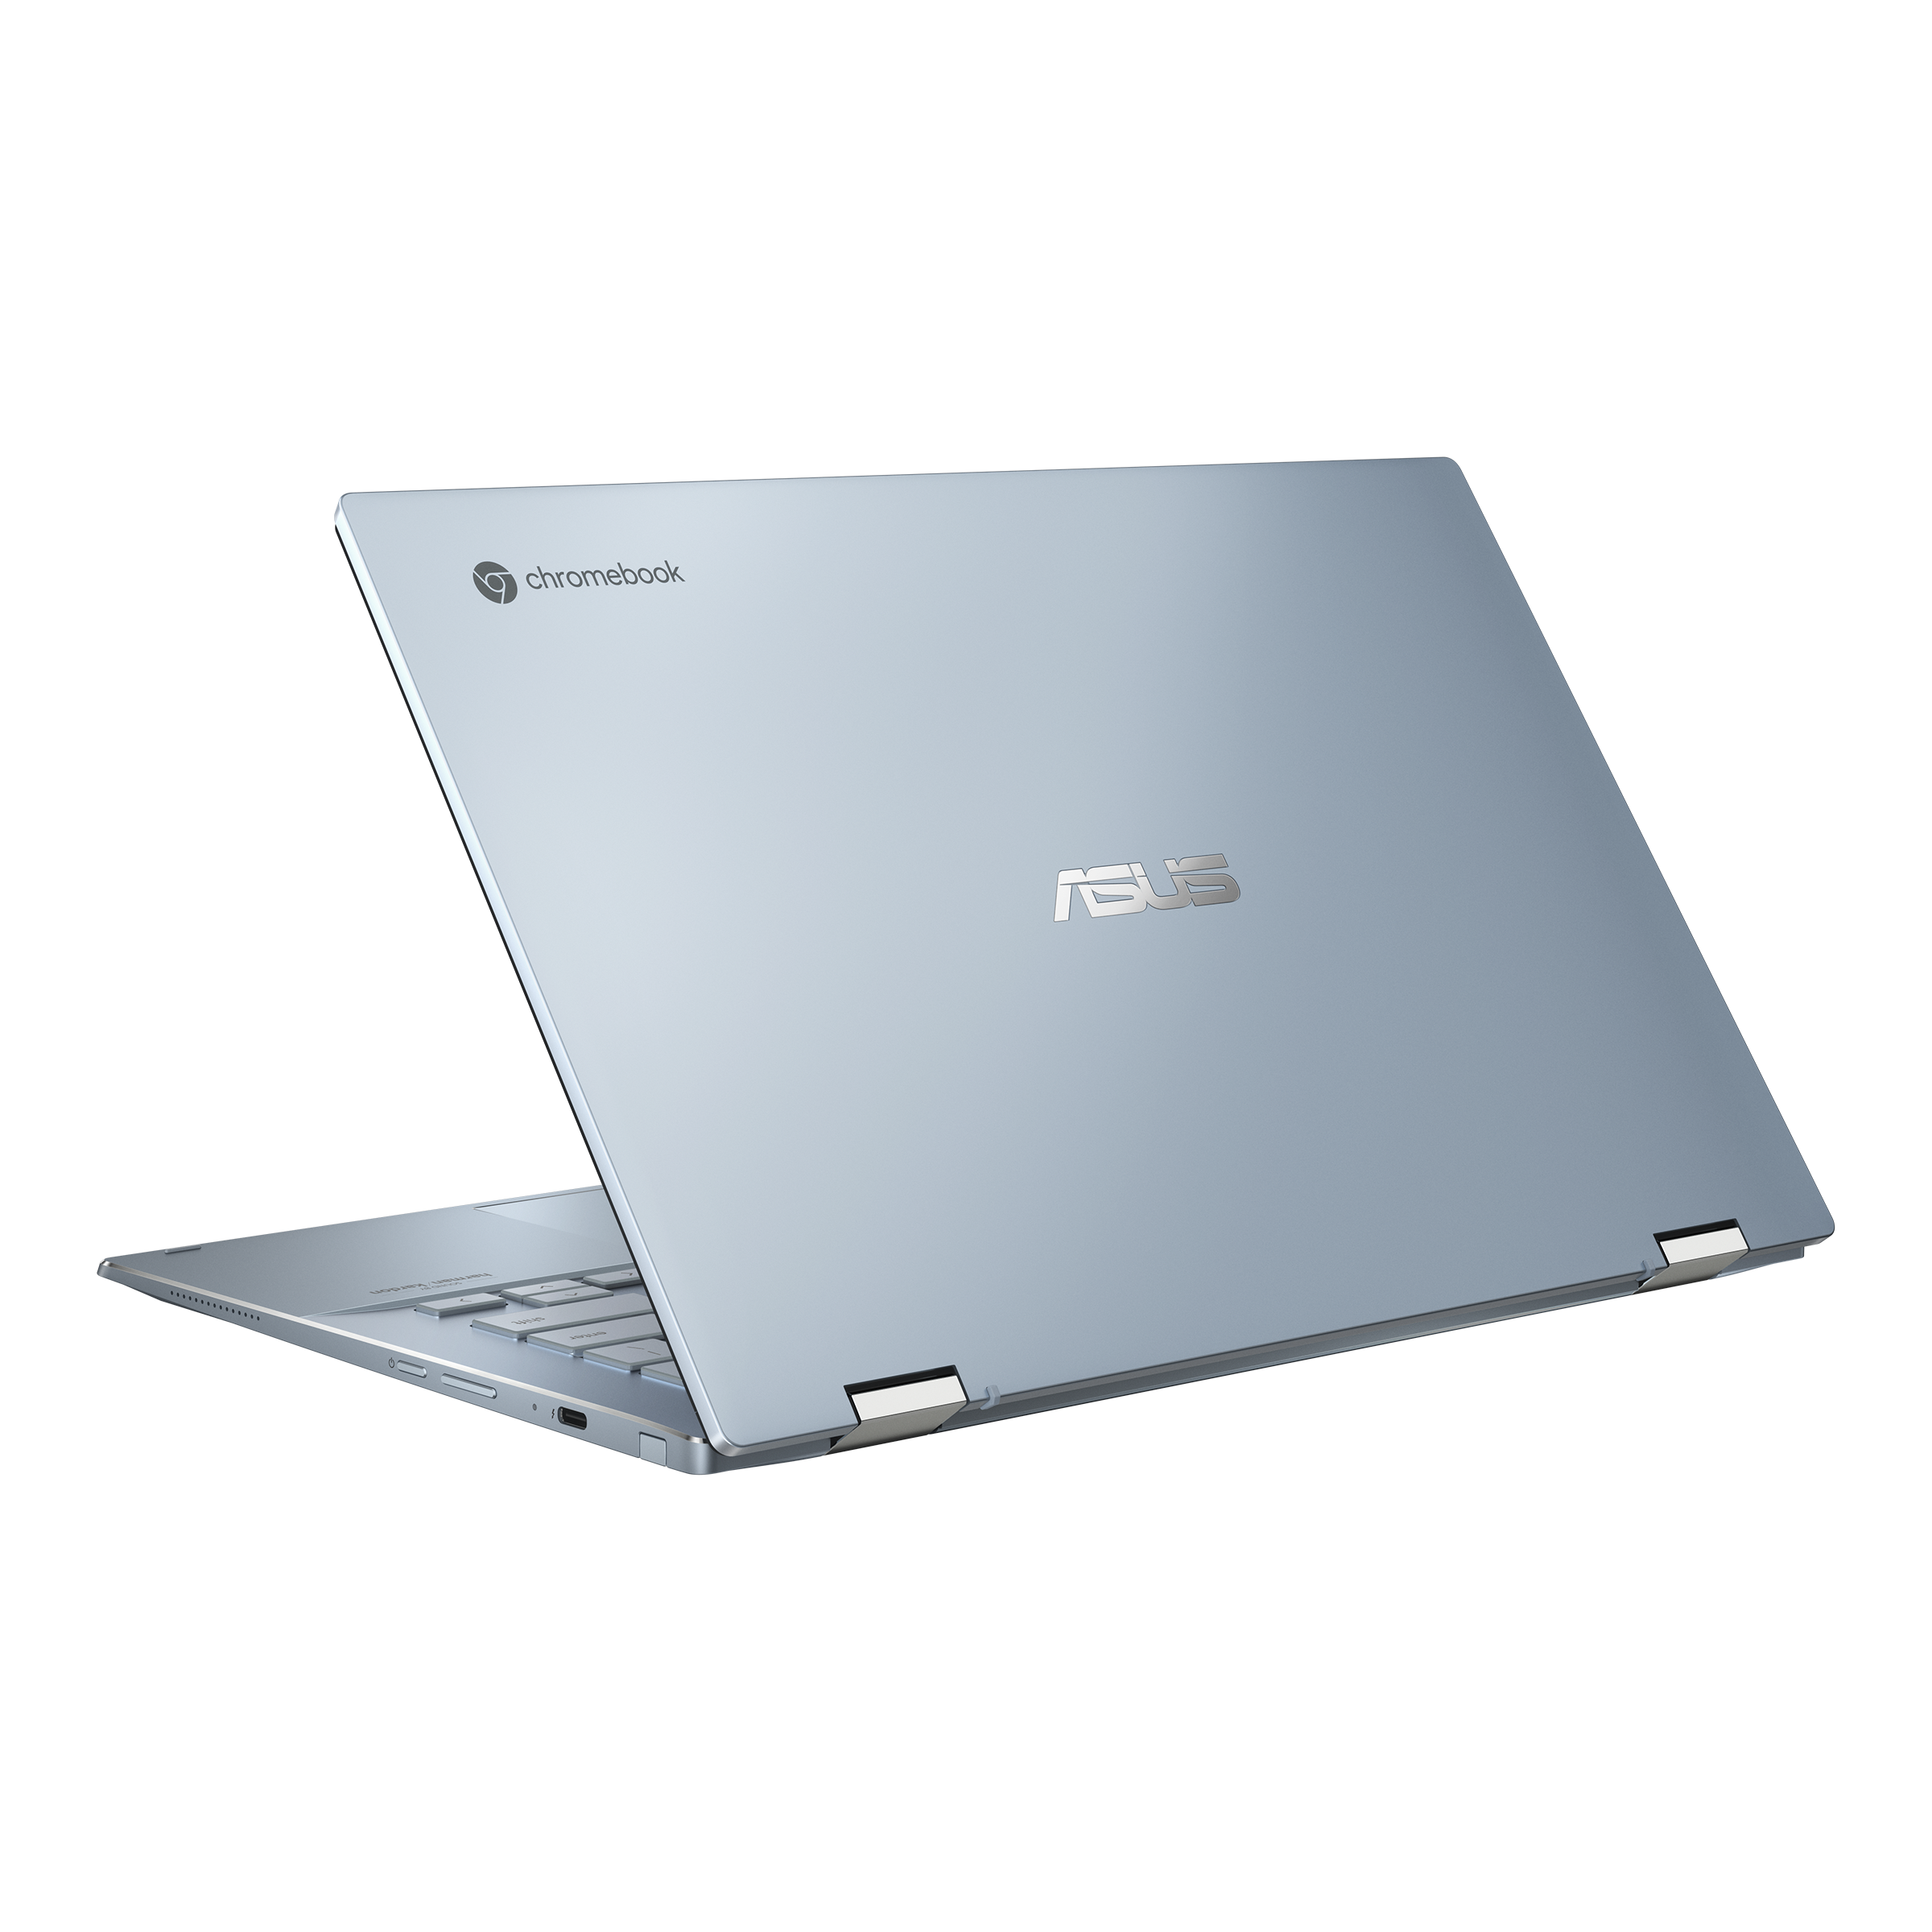 ASUS Chromebook Flip CX5 (CX5400)｜Laptops For Home｜ASUS Global